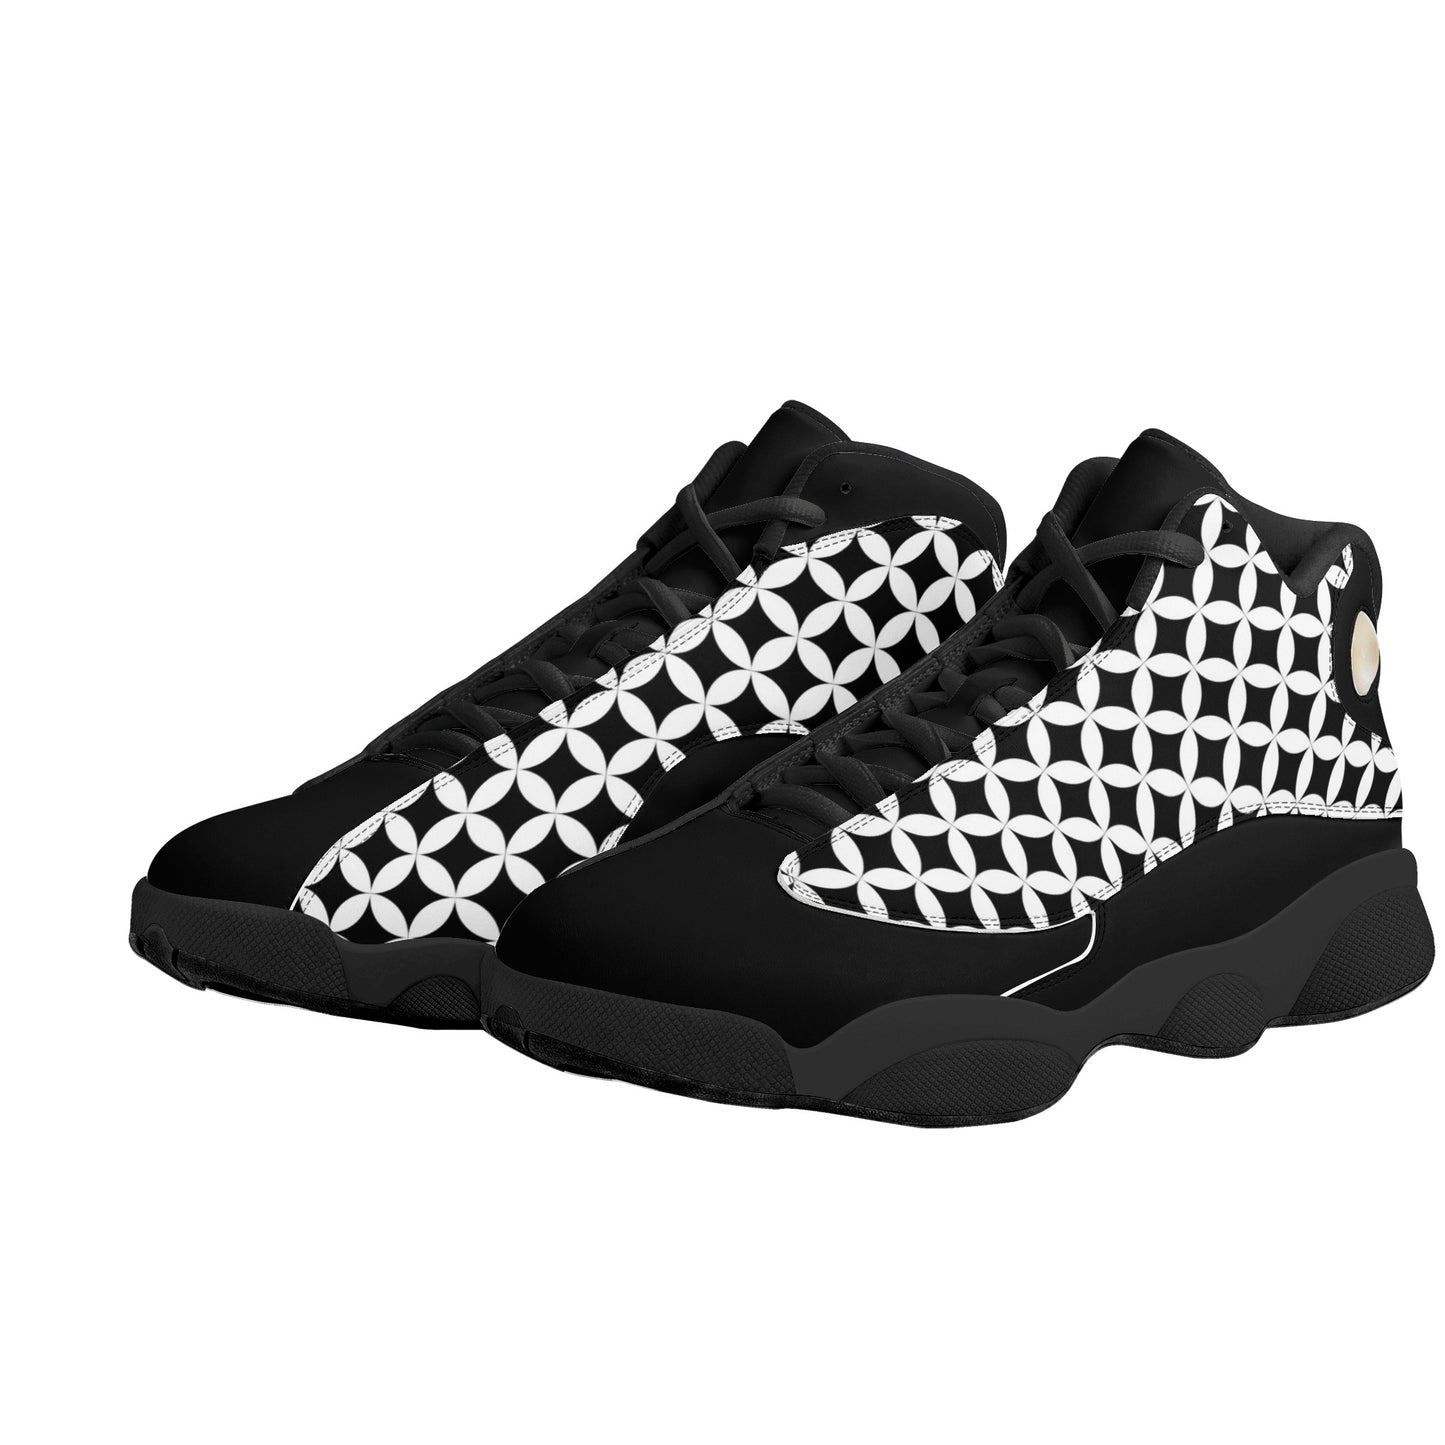 Rongoworks Archidamus Vegan Leather Basketball Shoes Rongoworks